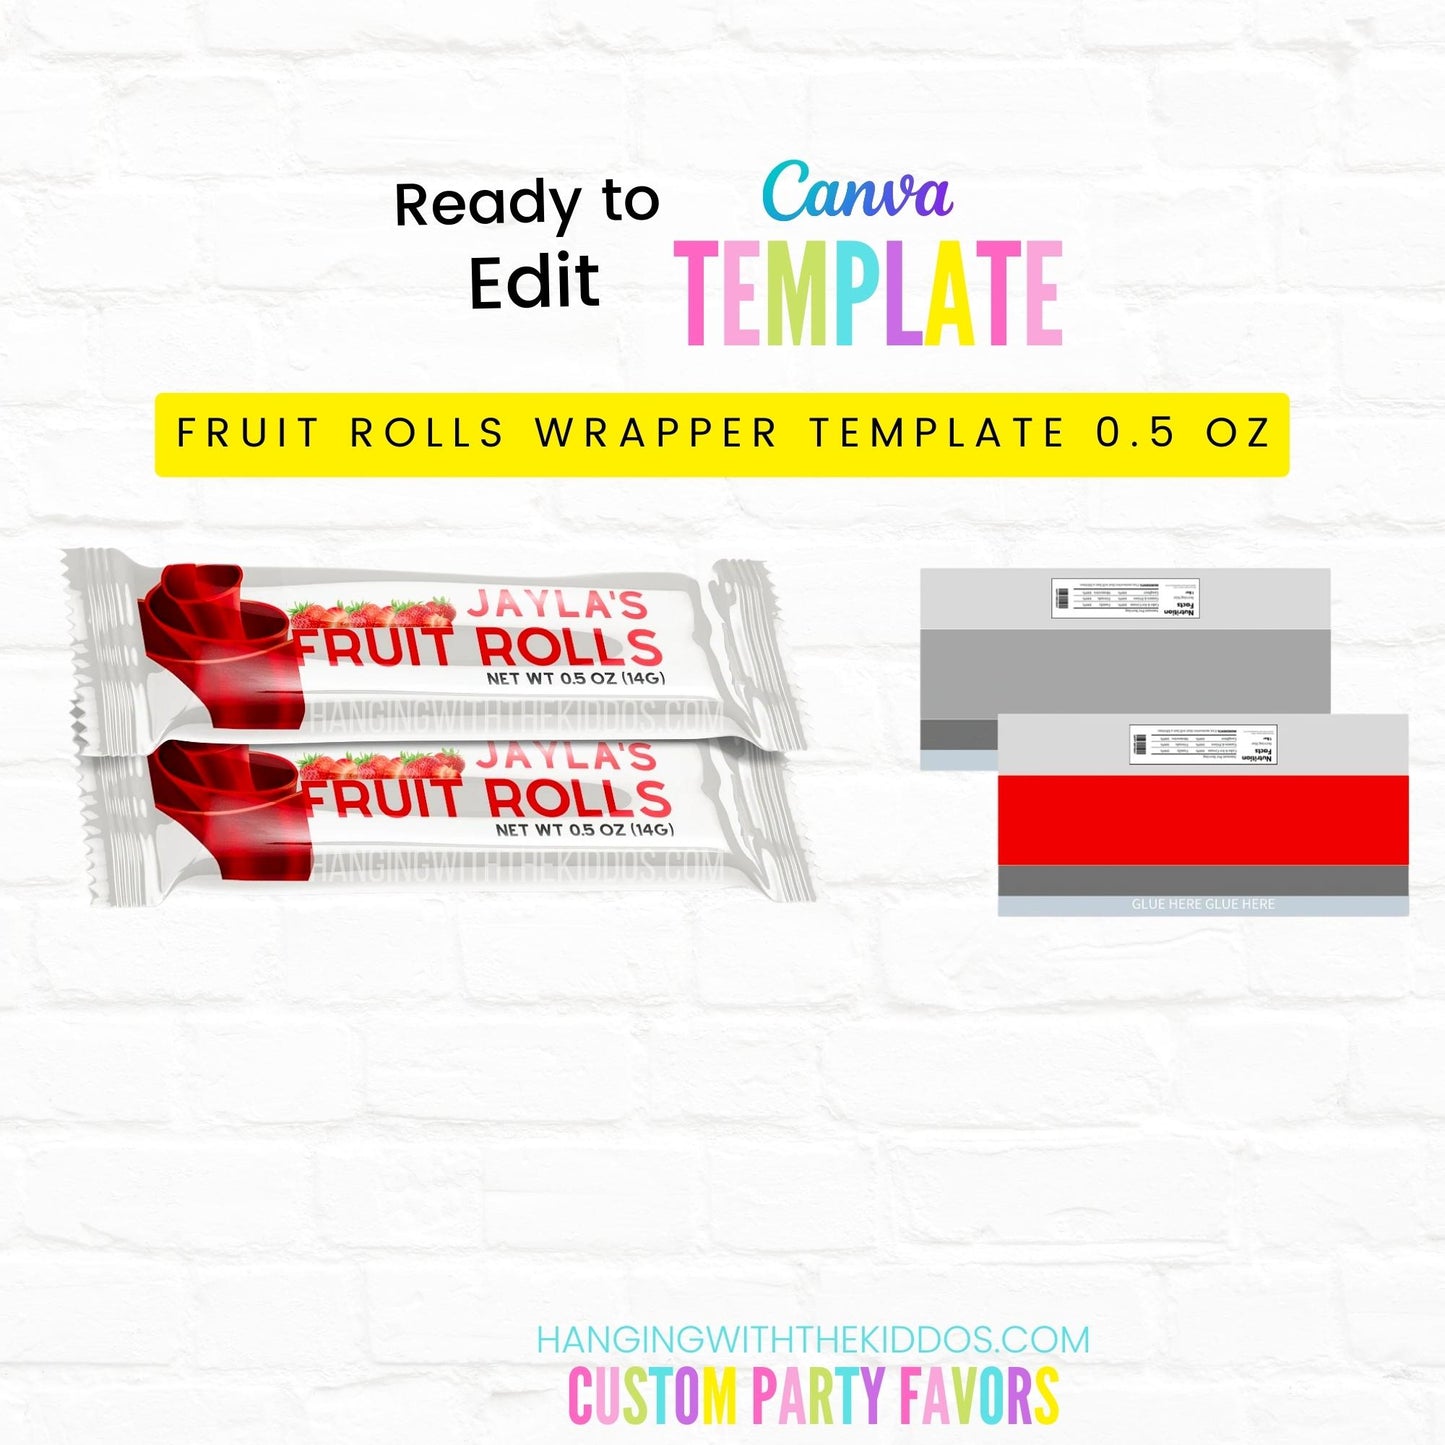 Fruit Rolls Wrappers Template